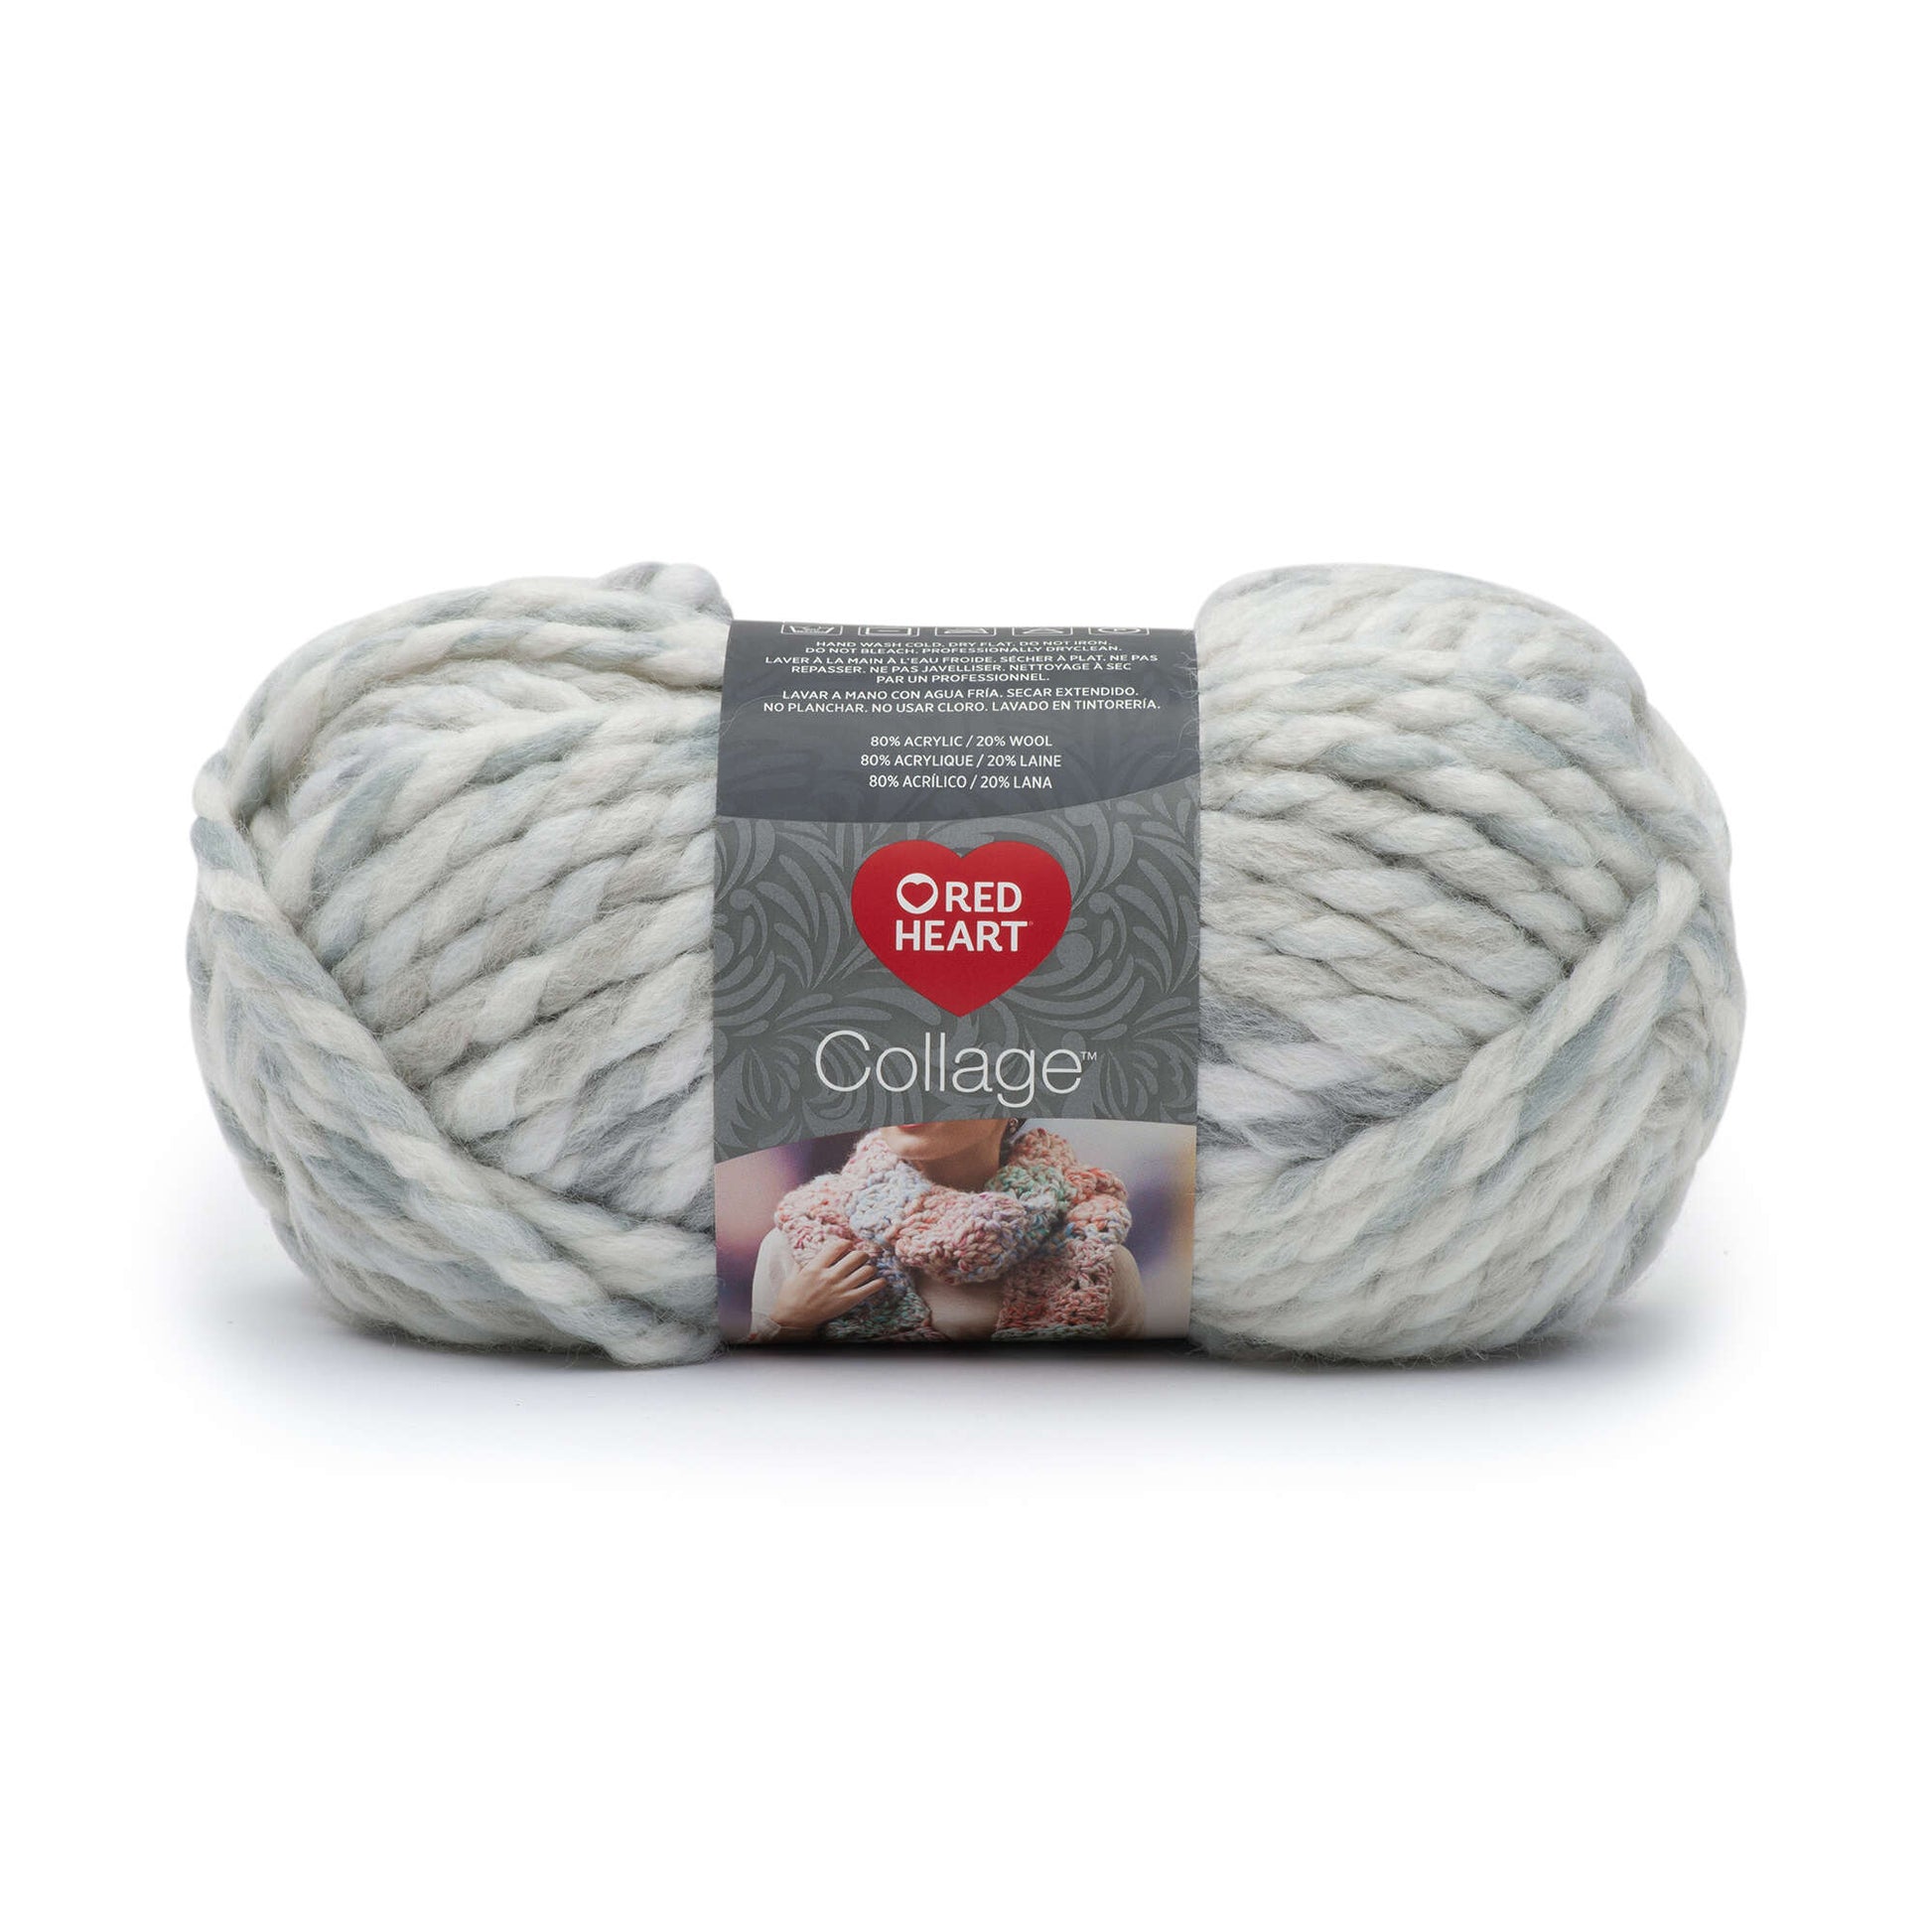 Red Heart Collage Yarn - Discontinued shades